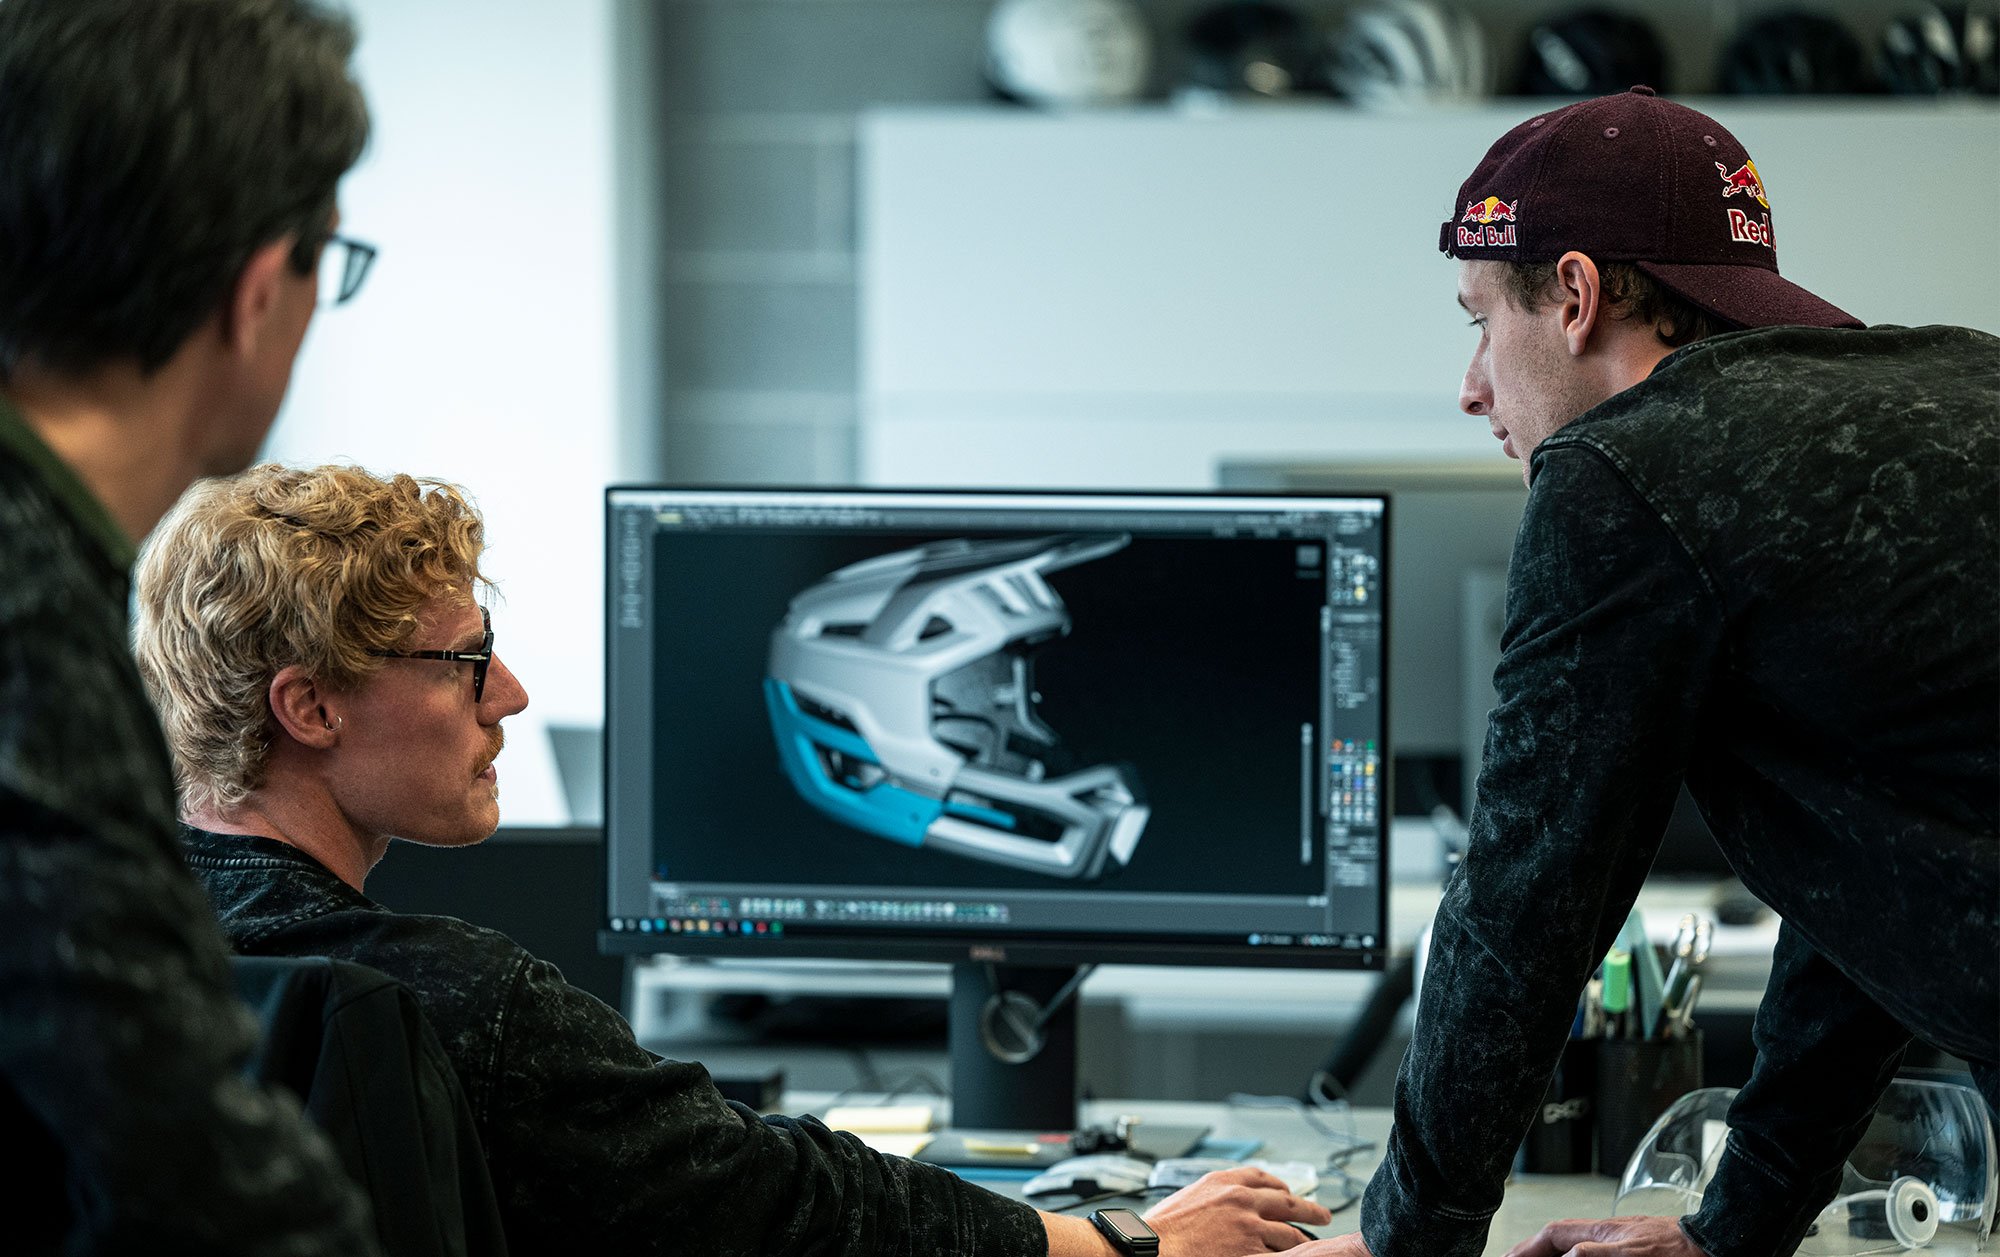 Bluegrass Vanguard is a Full-Face MTB Helmet designed for Enduro, Trail and E-MTB with Five-star rating from the Virginia Tech Helmet Lab